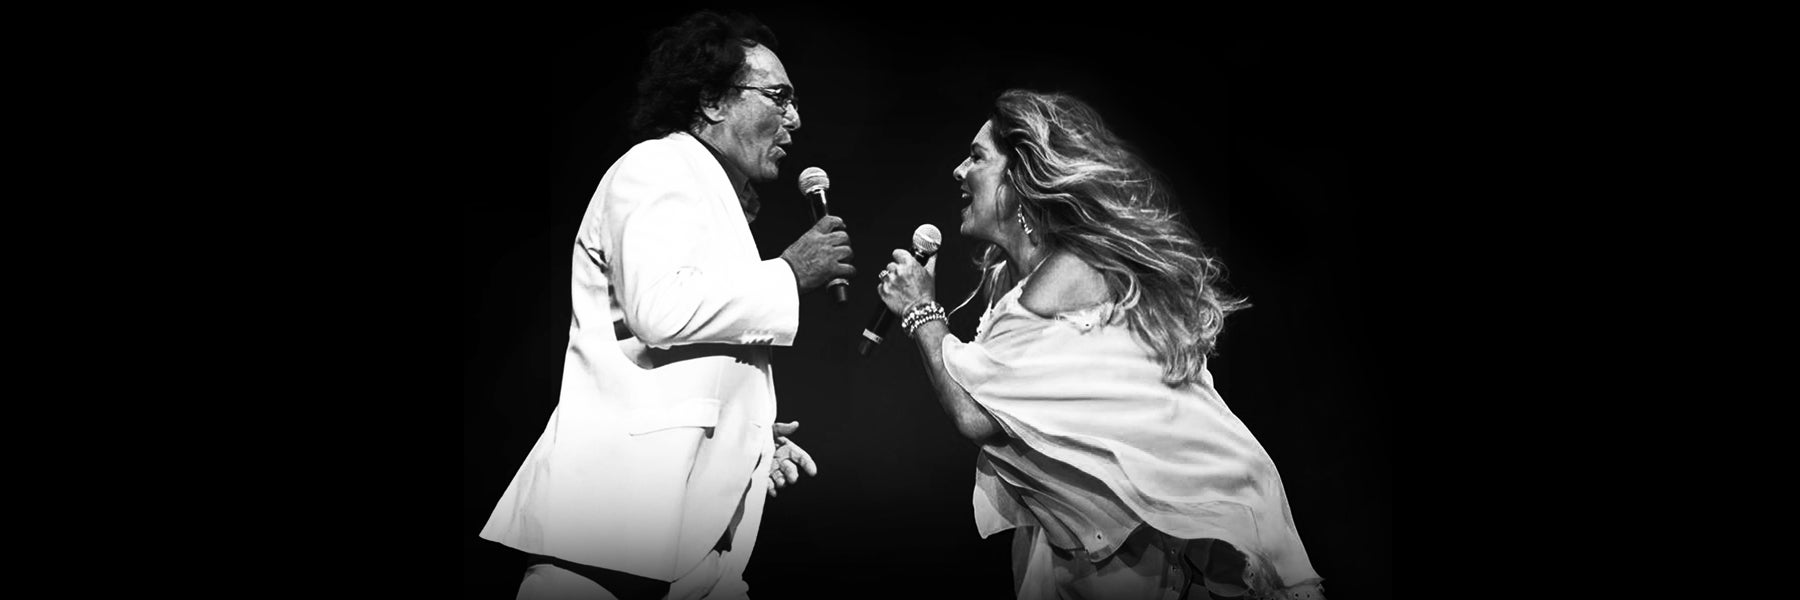 Image used with permission from Ticketmaster | Albano & Romina Power Italian Tour tickets